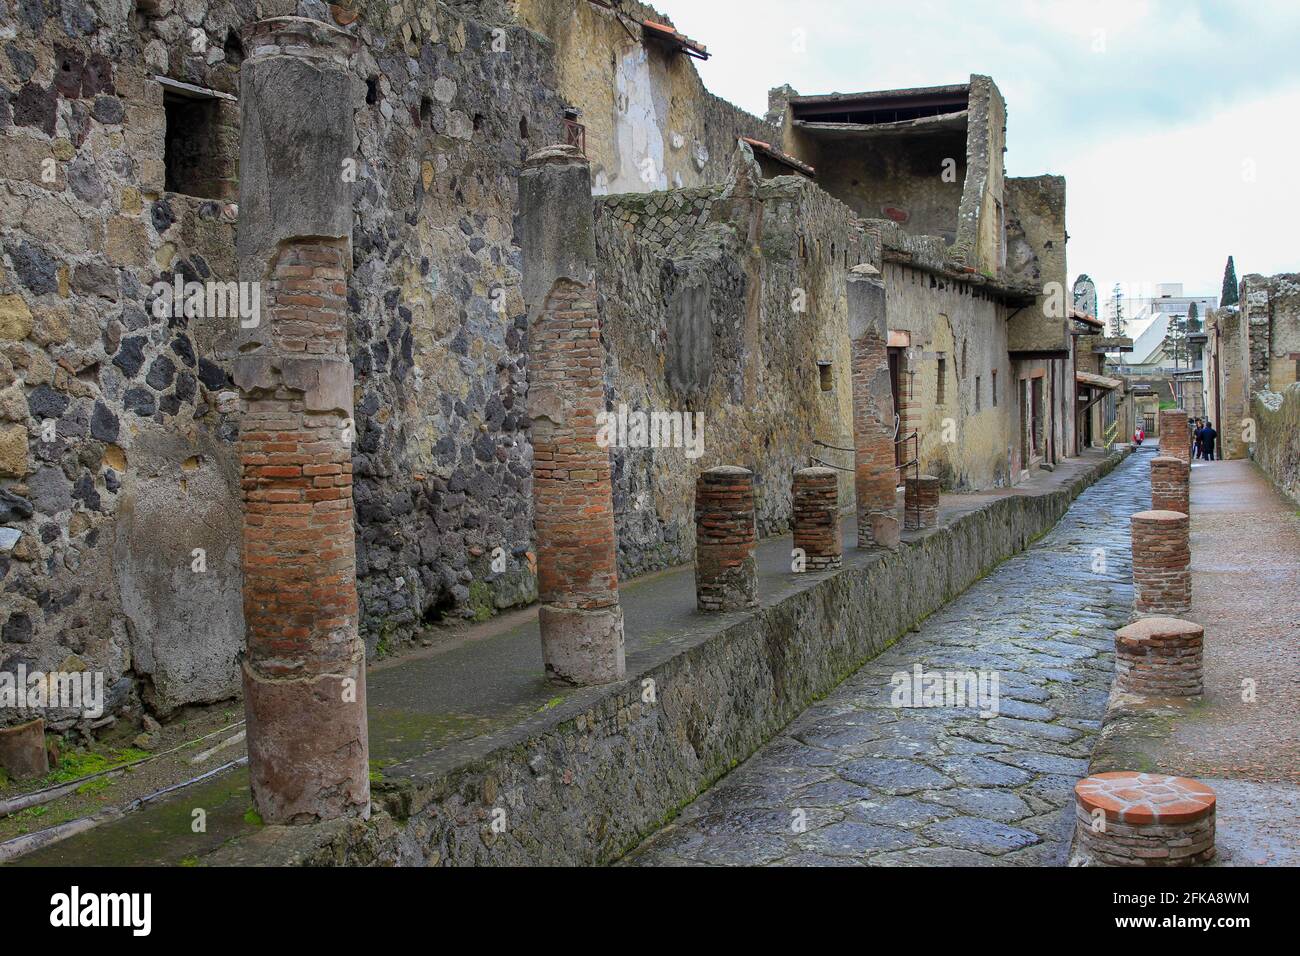 Ancient street with columns and buildings in Pompeii, Italy Stock Photo